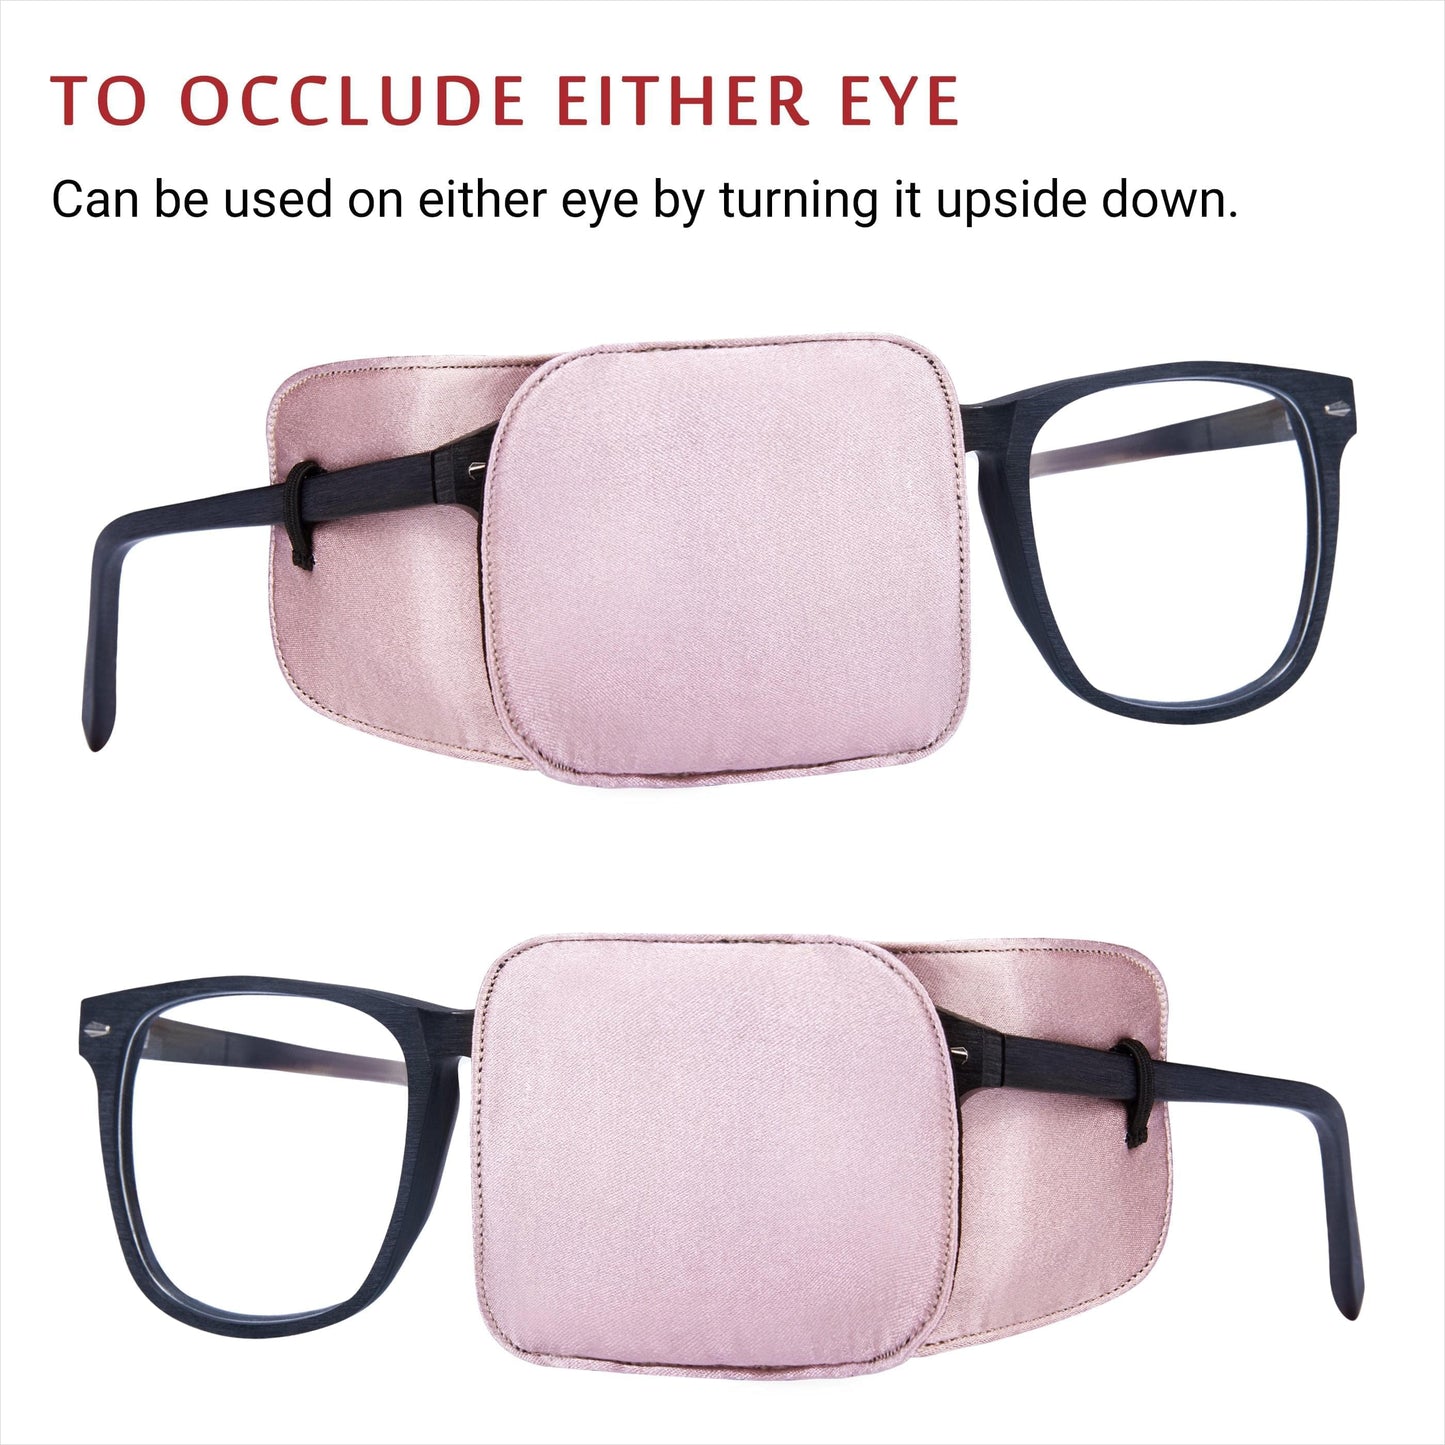 Silk Eye Patch for Glasses (Large, Dusty Rose Pink)